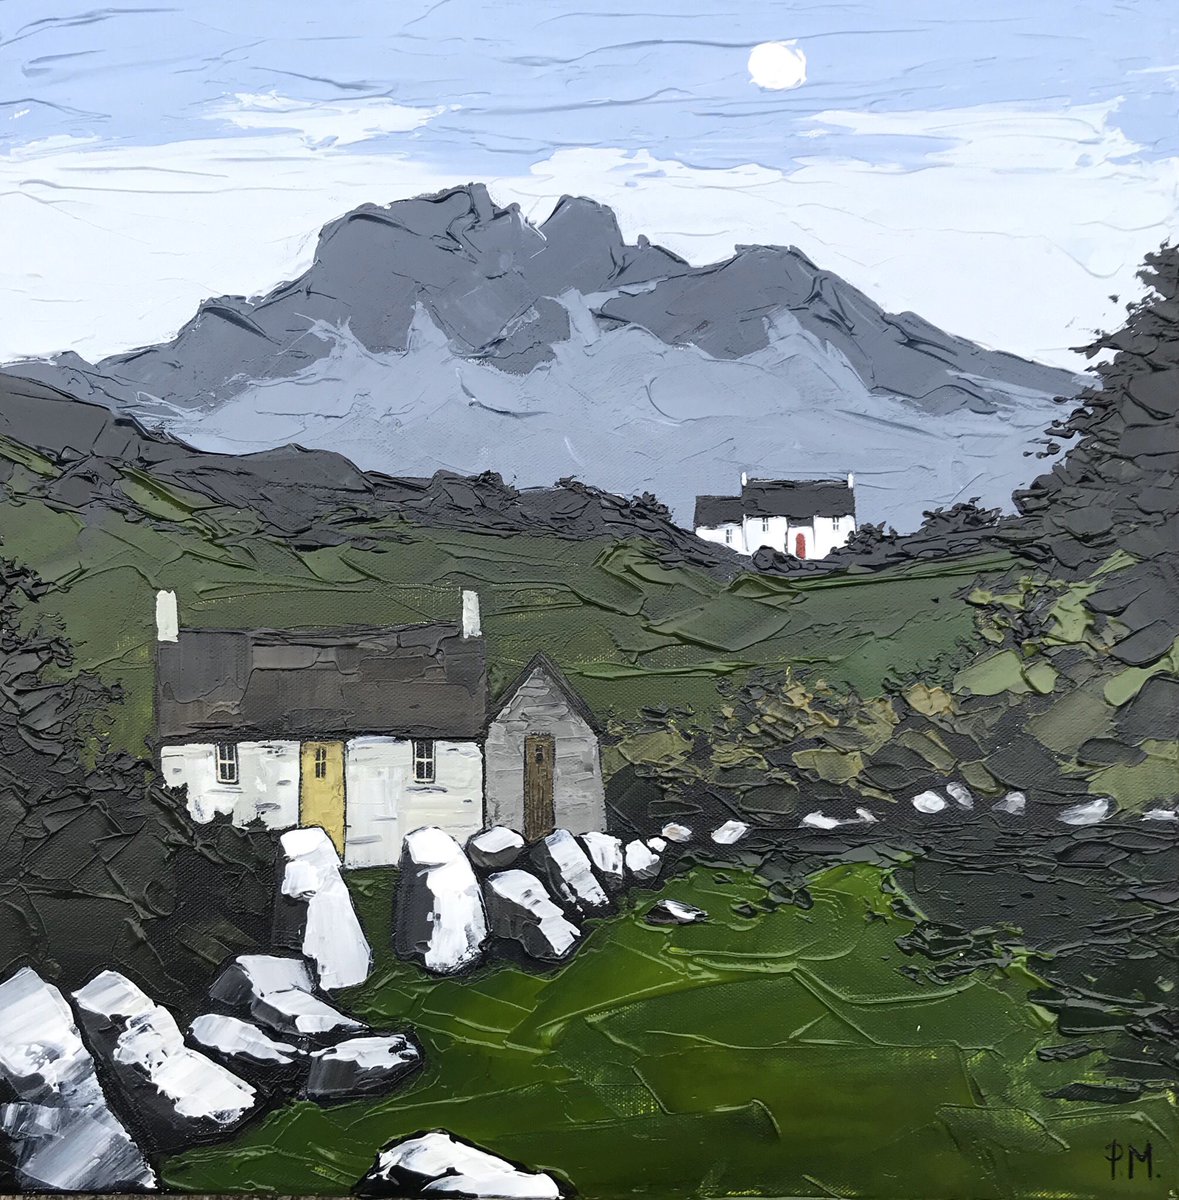 “John Pipers Cottage on Garn Fawr” North Pembrokeshire. Hope to get out there soon.... #johnpiper #johnpiperartist #pembrokeshire #pemrokeshirecoast #pembrokeshirecottage #pembrokeshireart #welshart #celfcymru #acrylicpainting #originalart